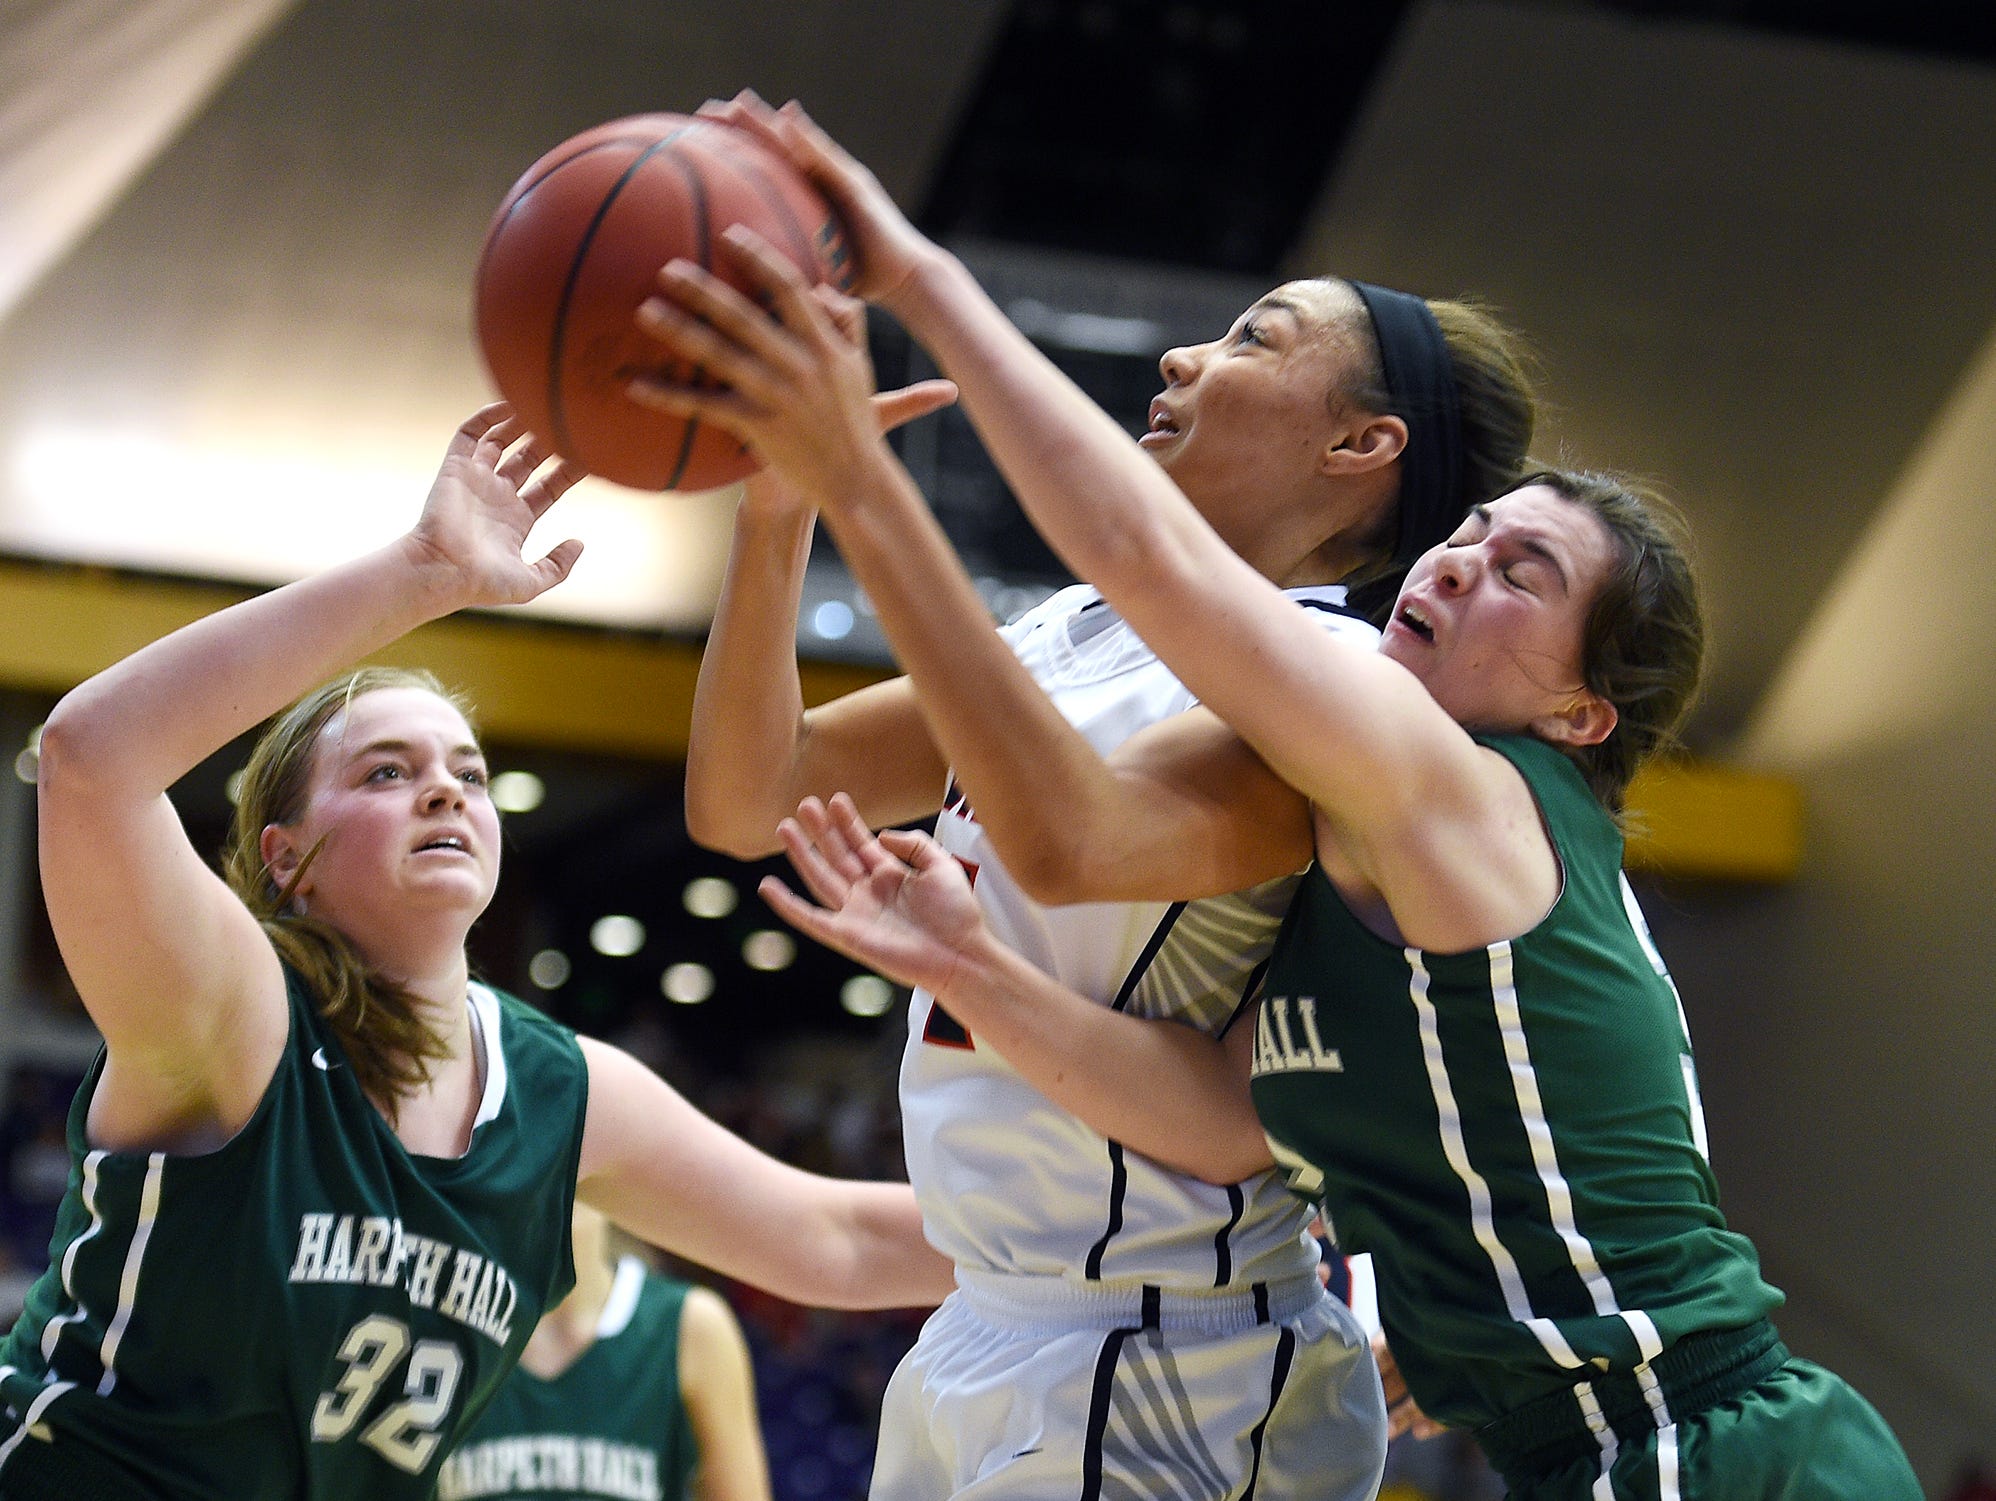 Brentwood Academy's Makaila Wilson (14) is fouled while shooting against Harpeth Hall's Mary Triplett (3) during the TSSAA DII-AA semifinals at Lipscomb University on March 4, 2016.